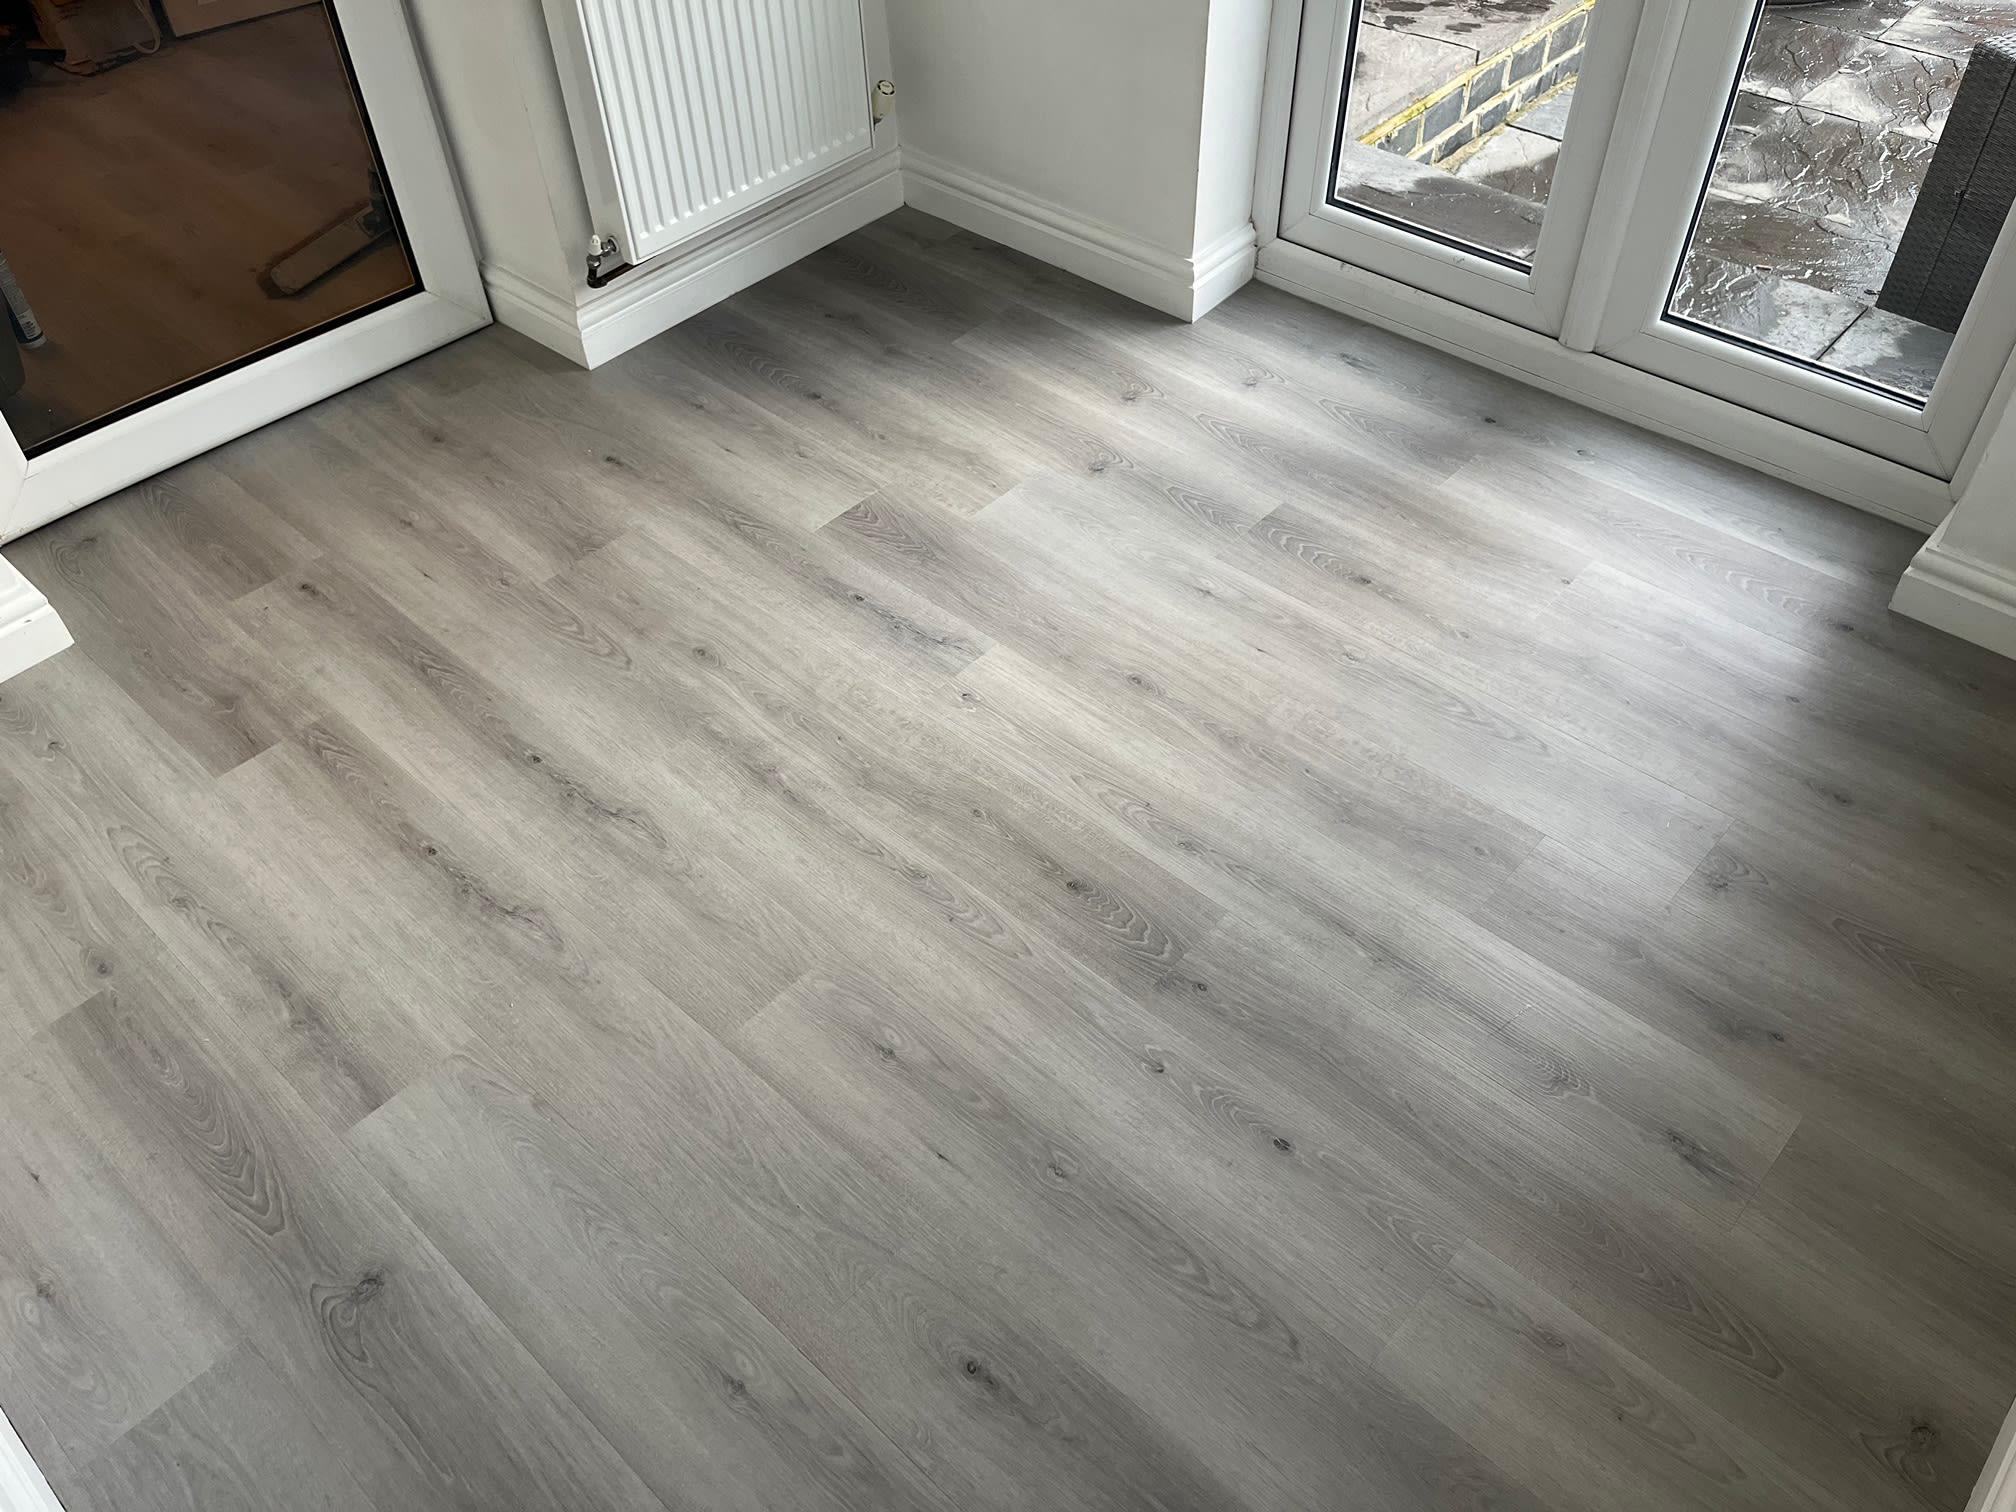 Images O'Donnell Flooring